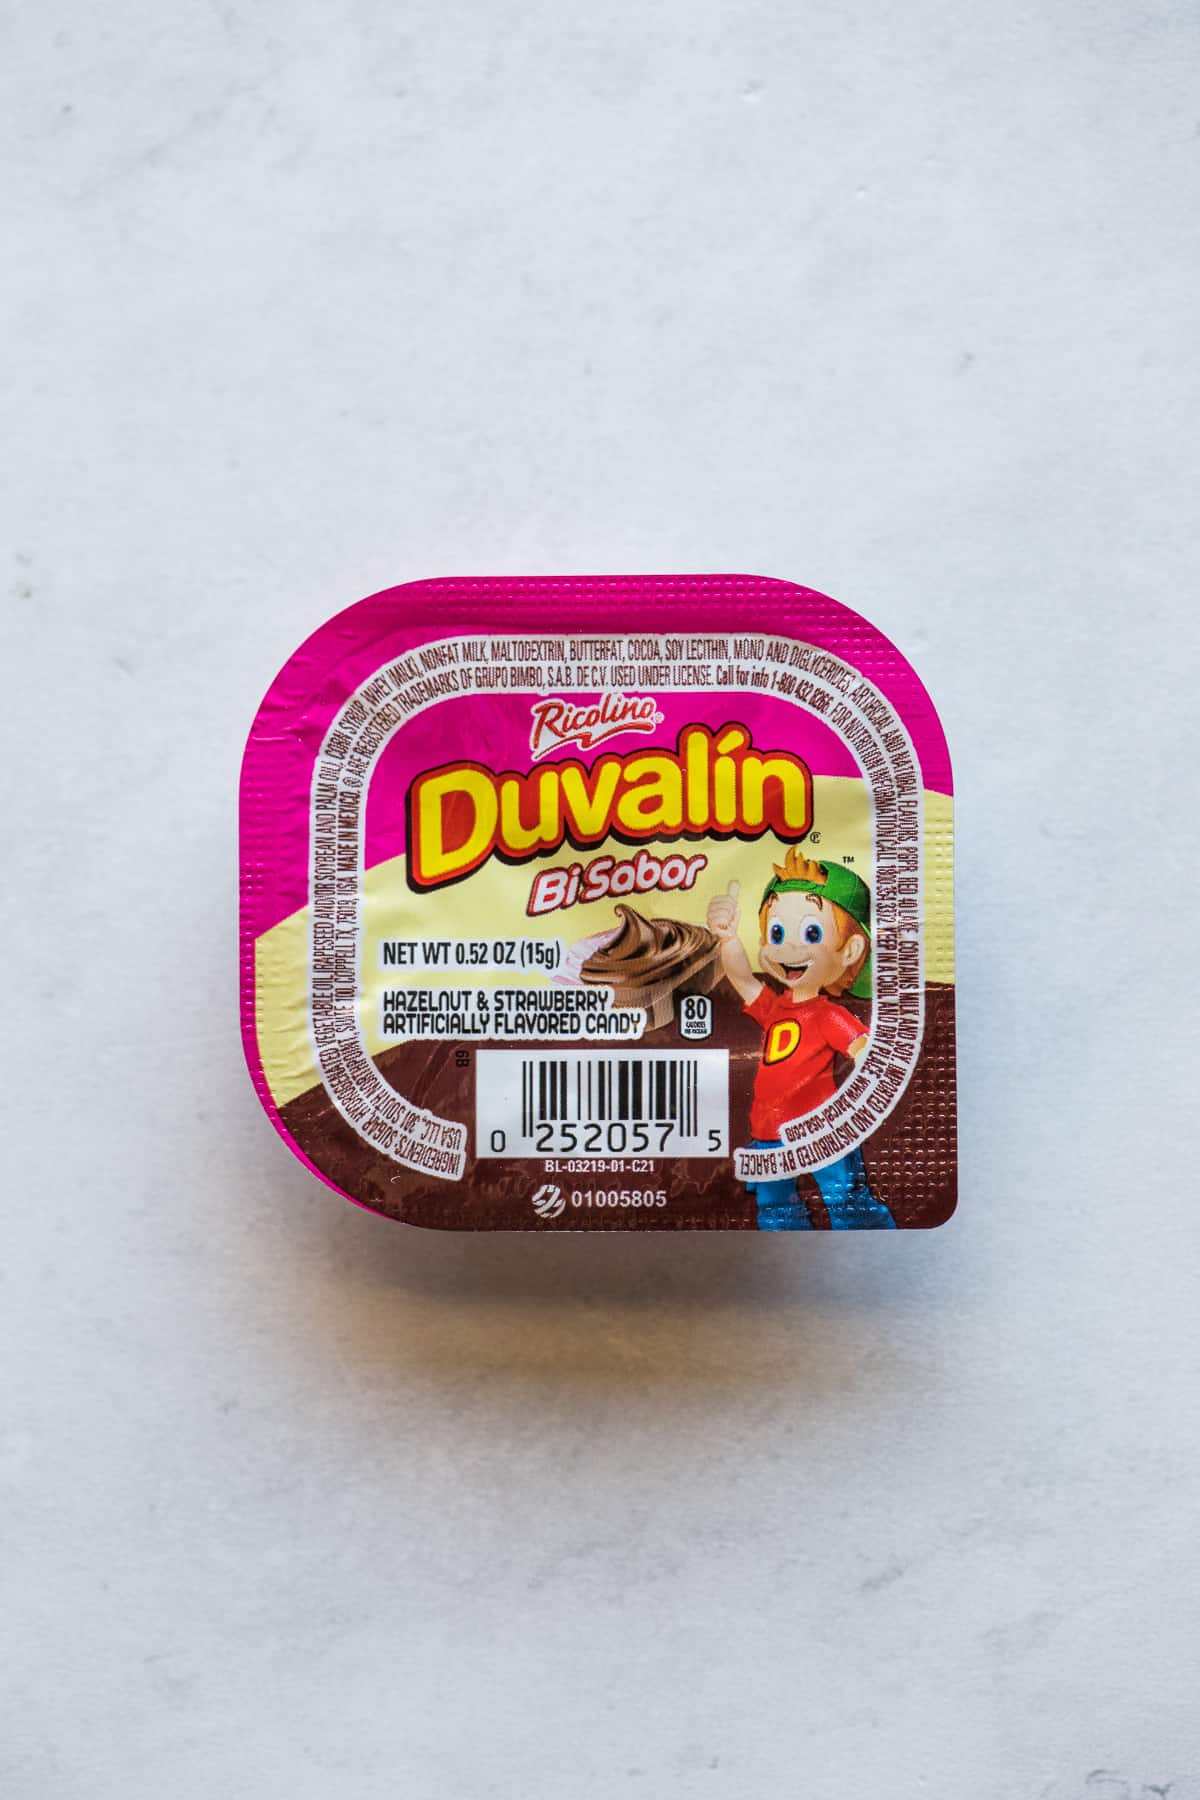 Duvalin BiSabor Mexican candy